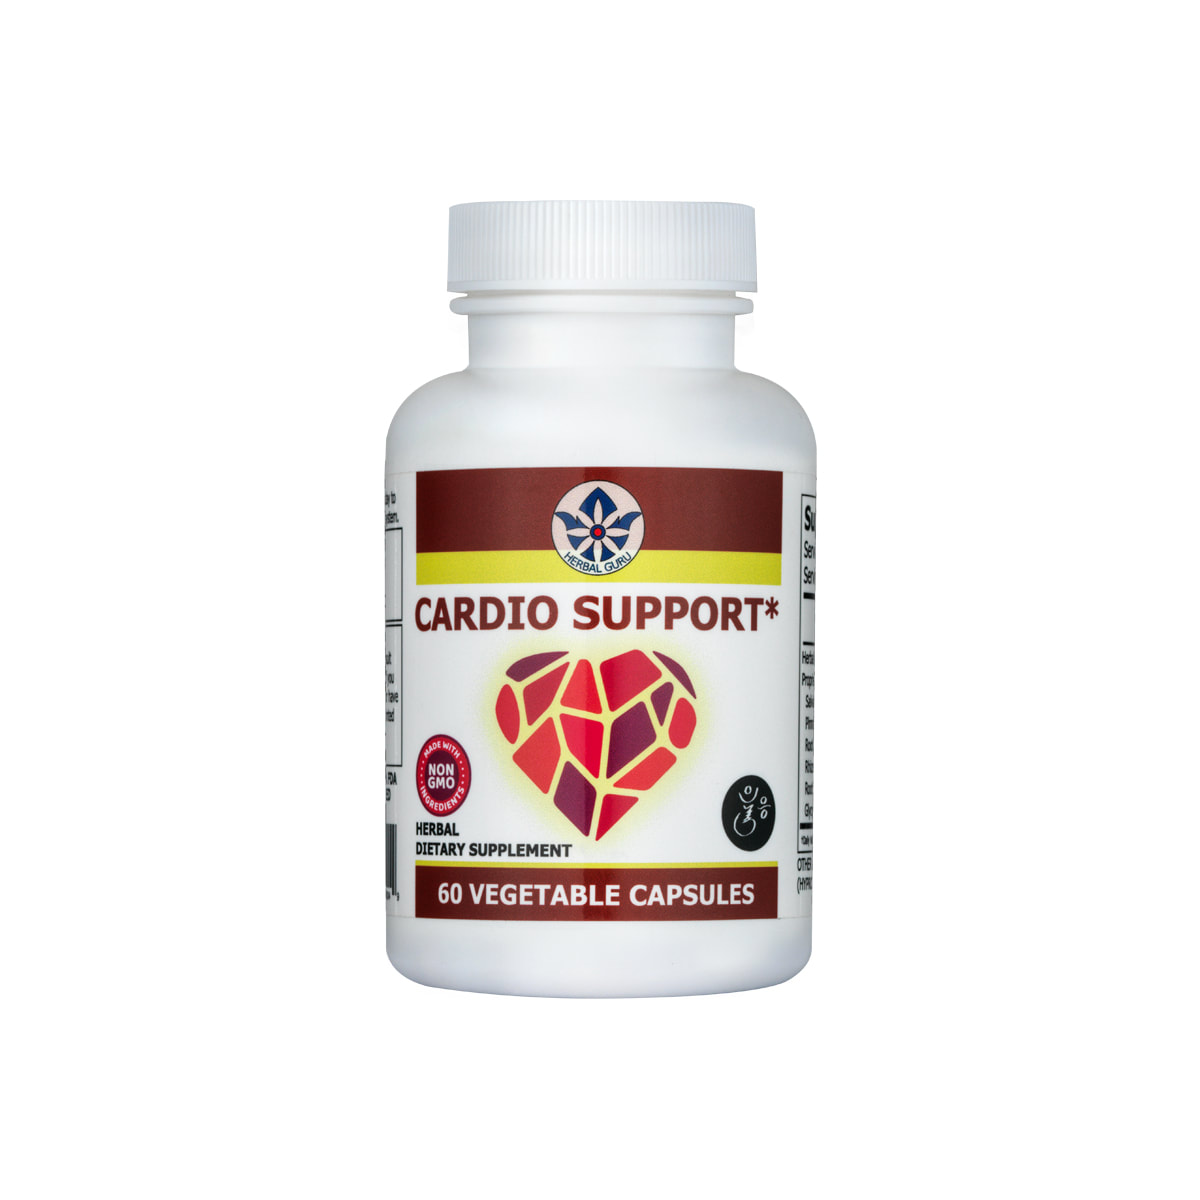 Herbal cardiovascular support